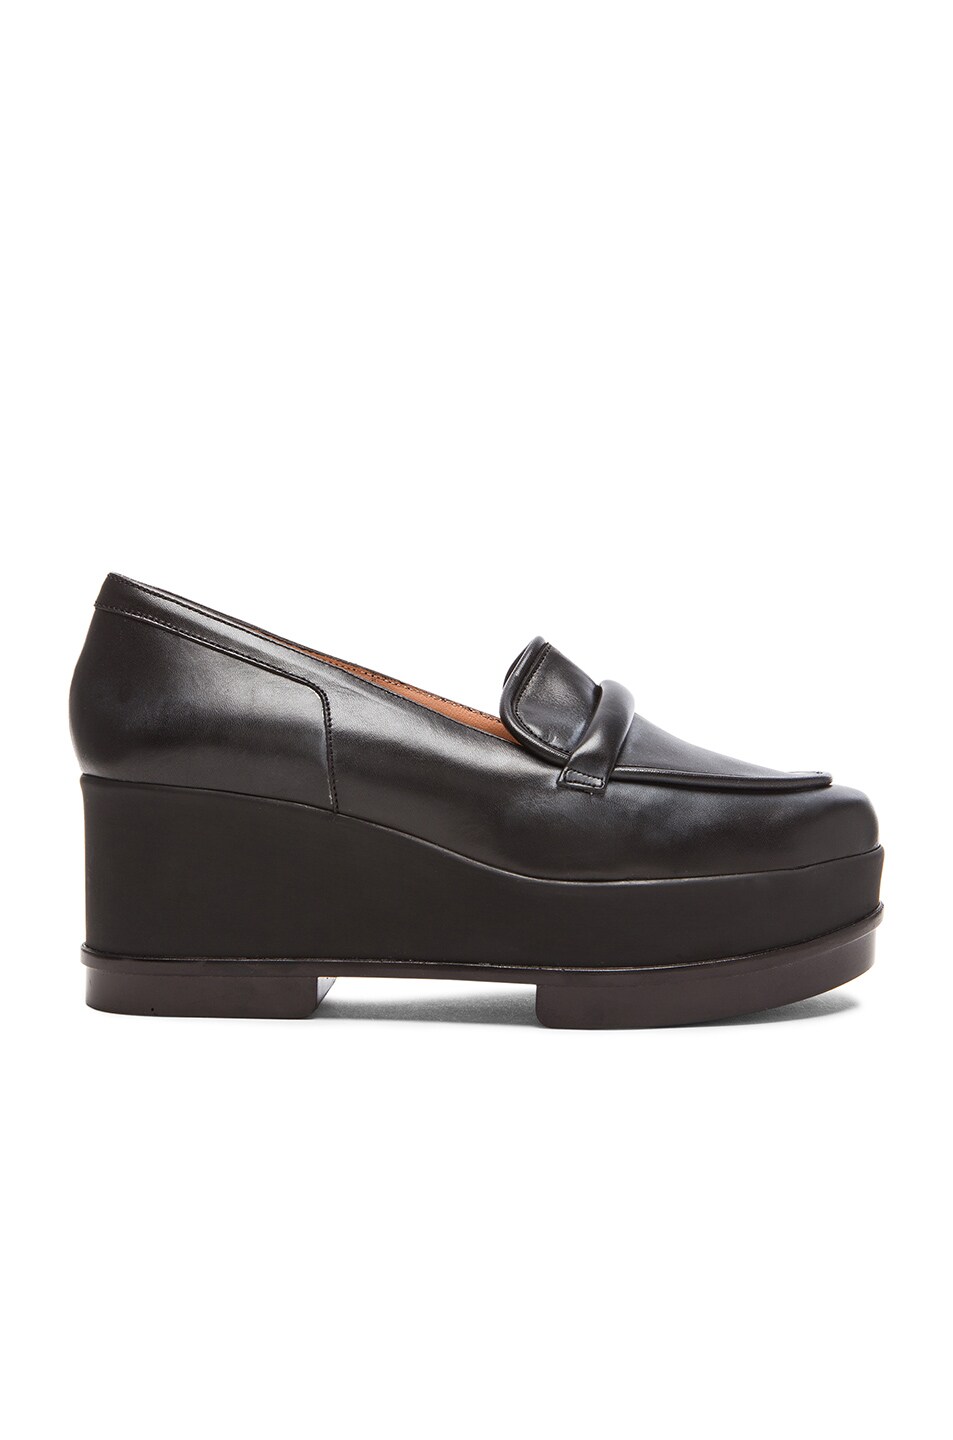 Robert Clergerie Yoko Leather Loafers in Black Leather | FWRD